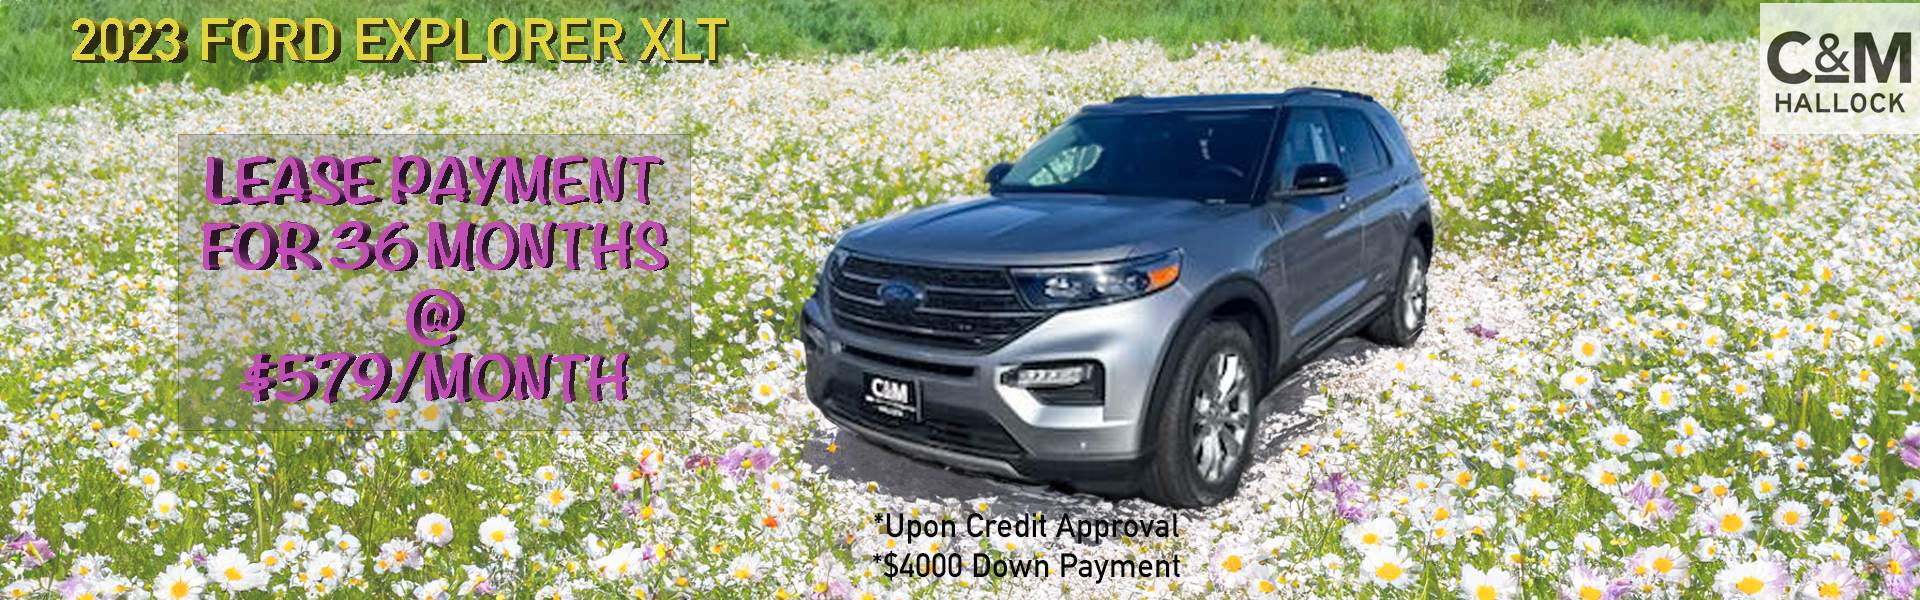 2023 Ford Explorer XLT Lease Special